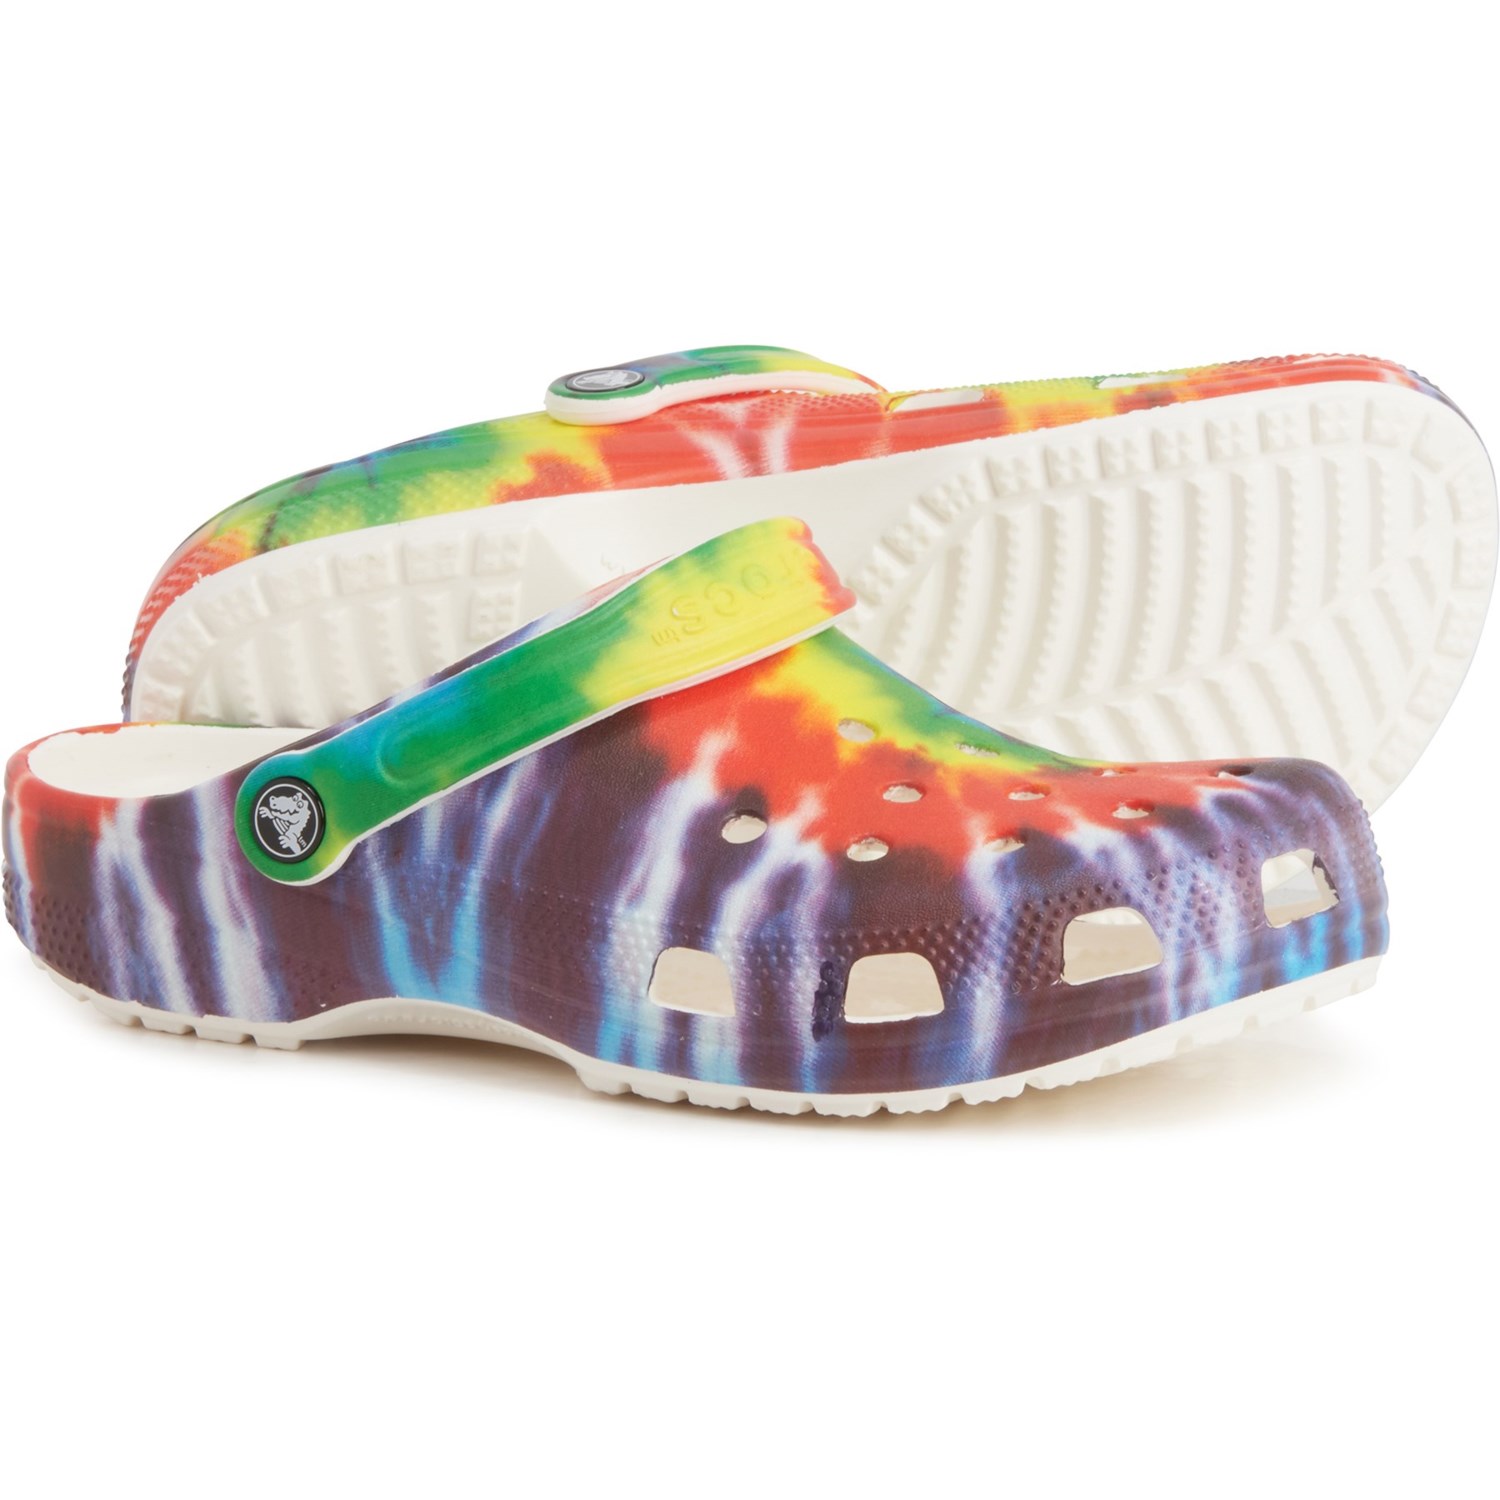 Crocs Classic Tie-Dye Graphic Clogs (For Men and Women)